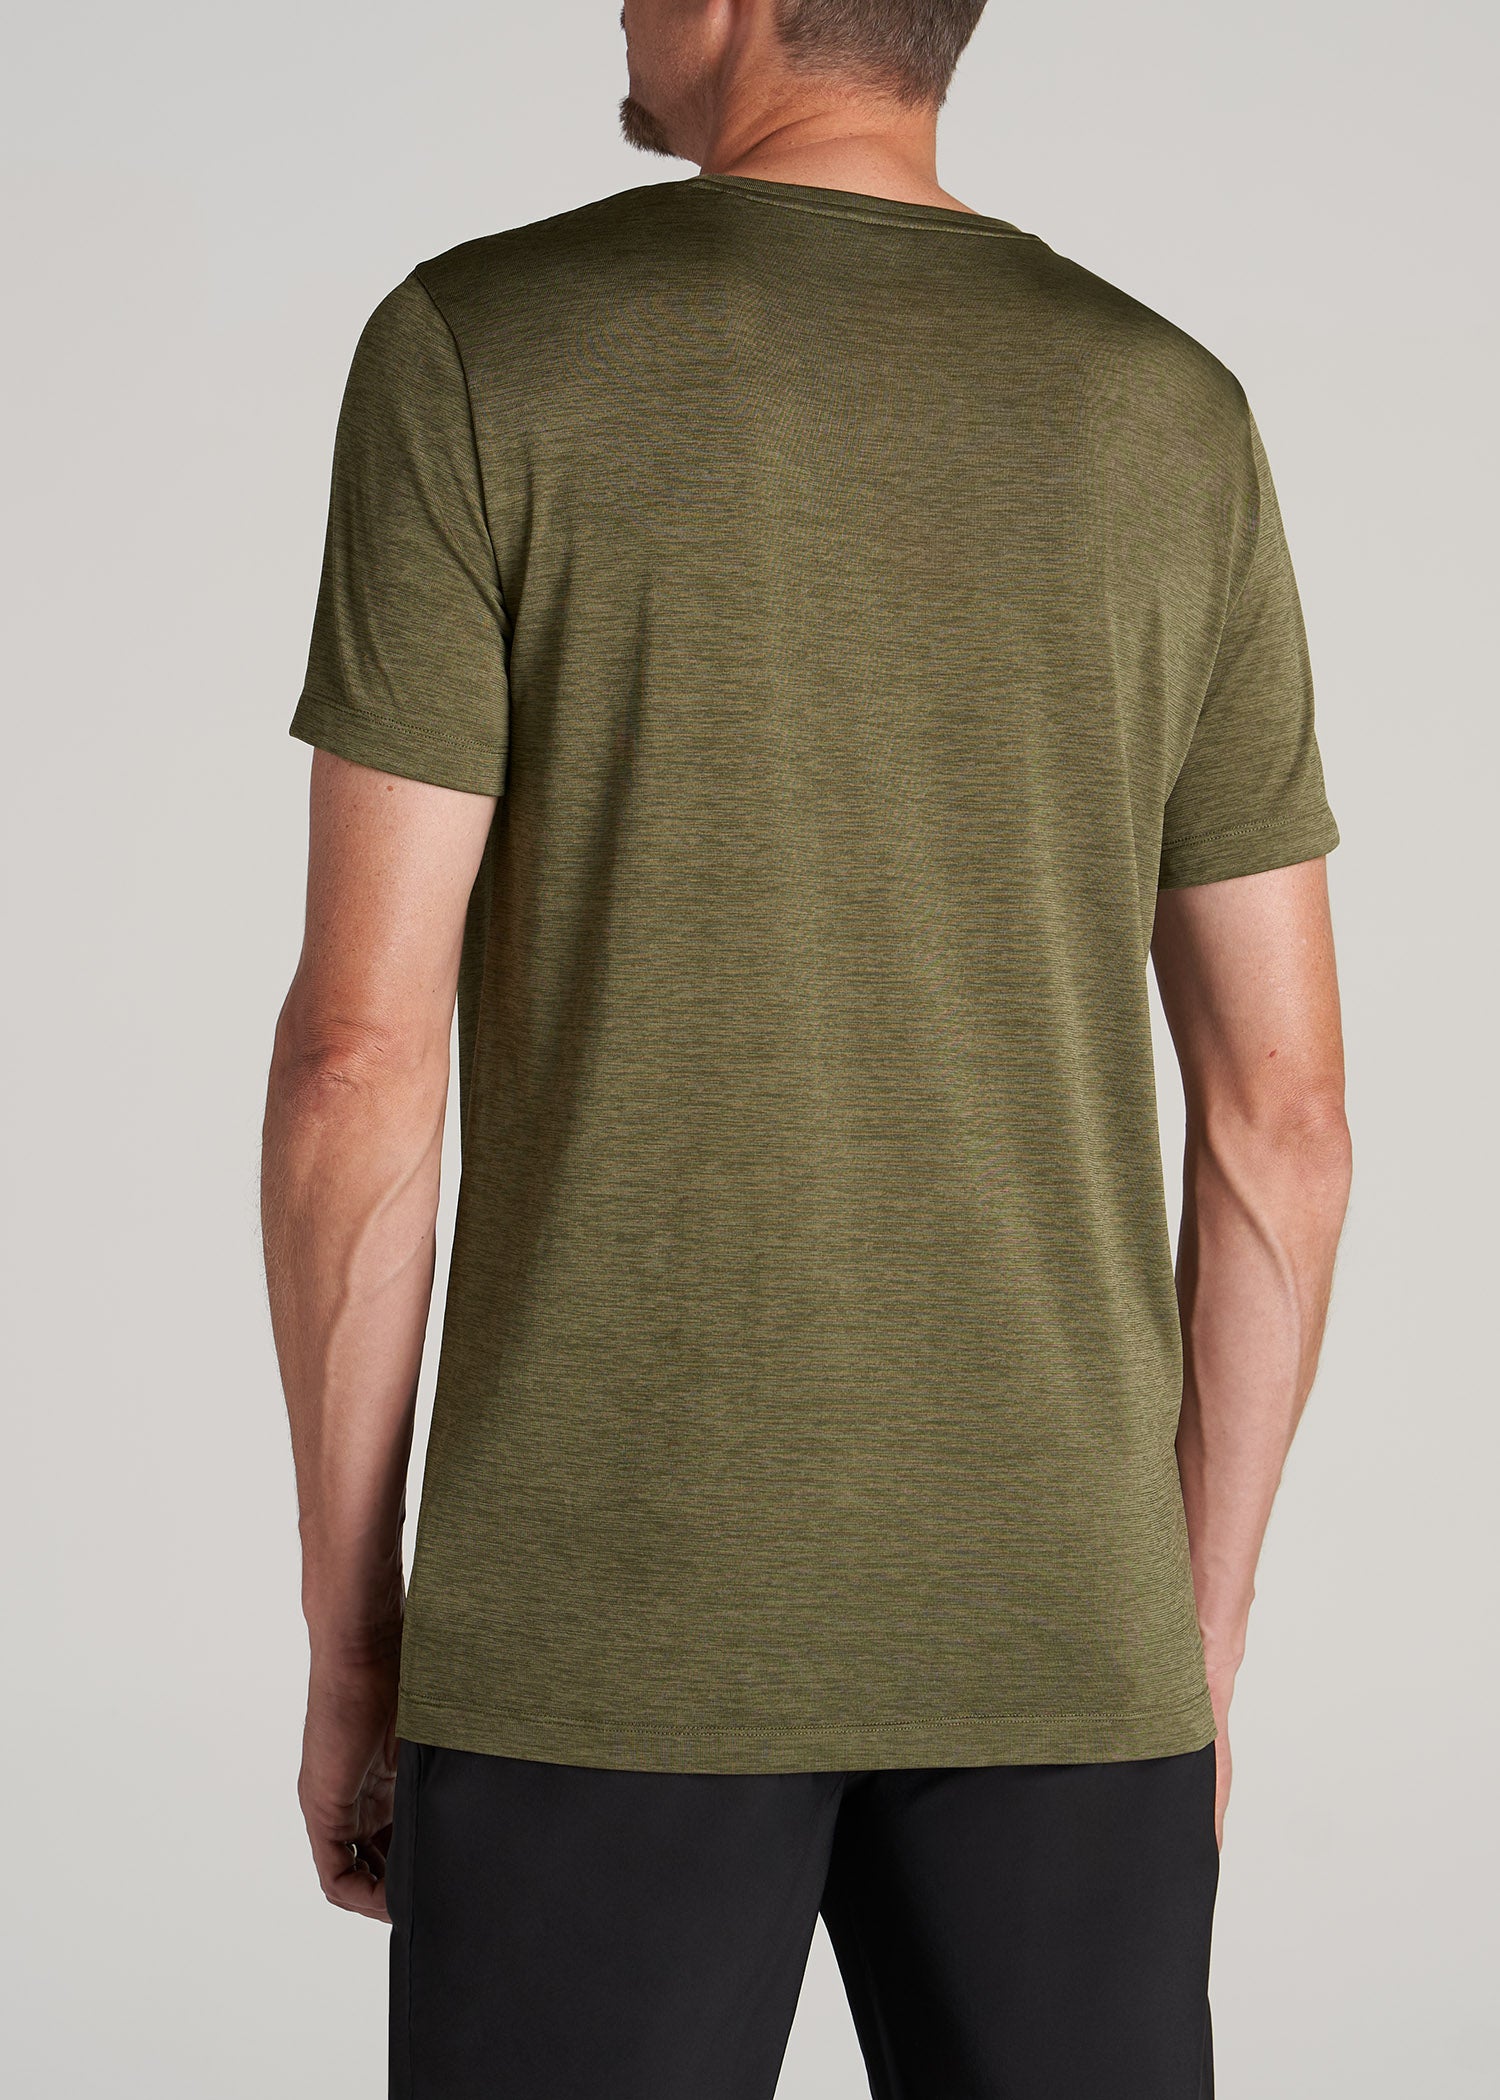 American-Tall-Men-AT-Performance-Short-Sleeve-Jersey-Athletic-Tee-Olive-Mix-back